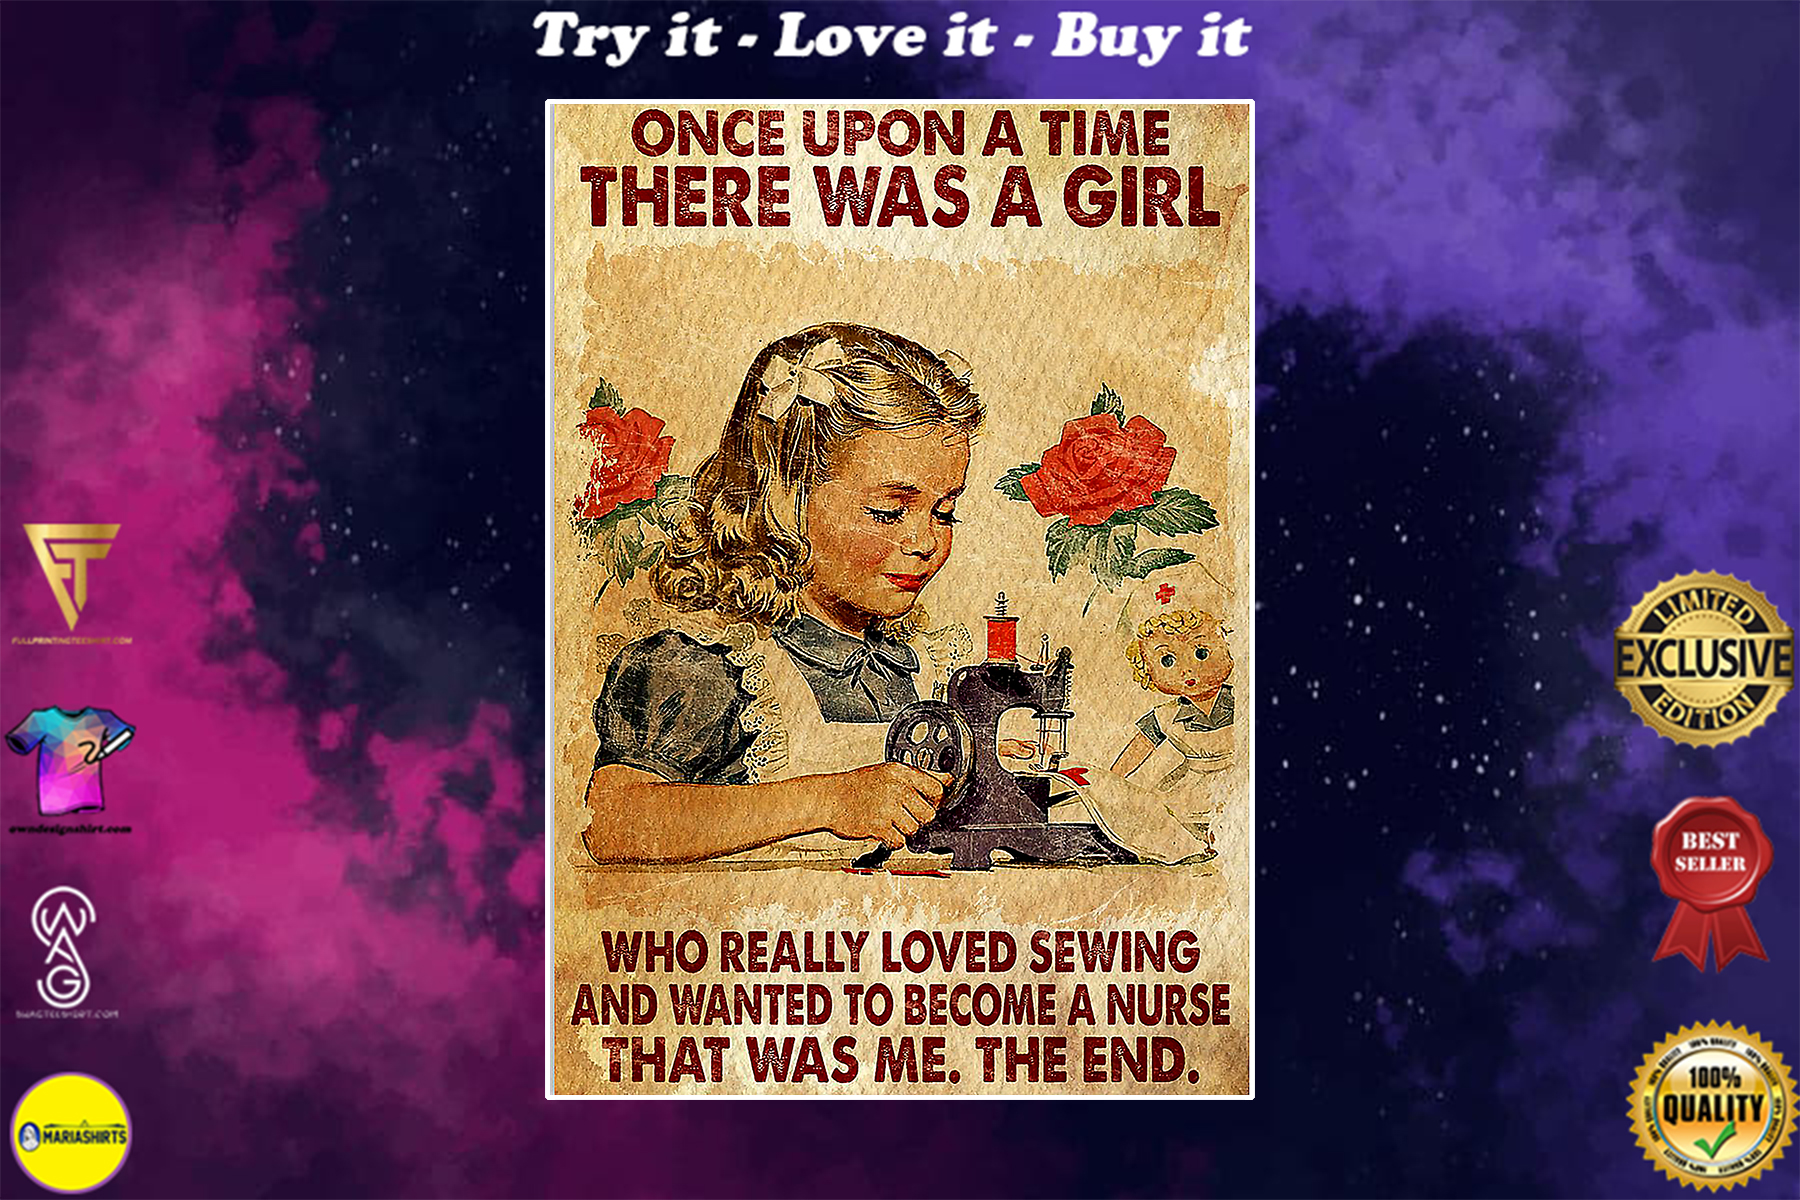 once upon a time there was a girl a girl who really loved sewing and wanted to become a nurse vintage poster